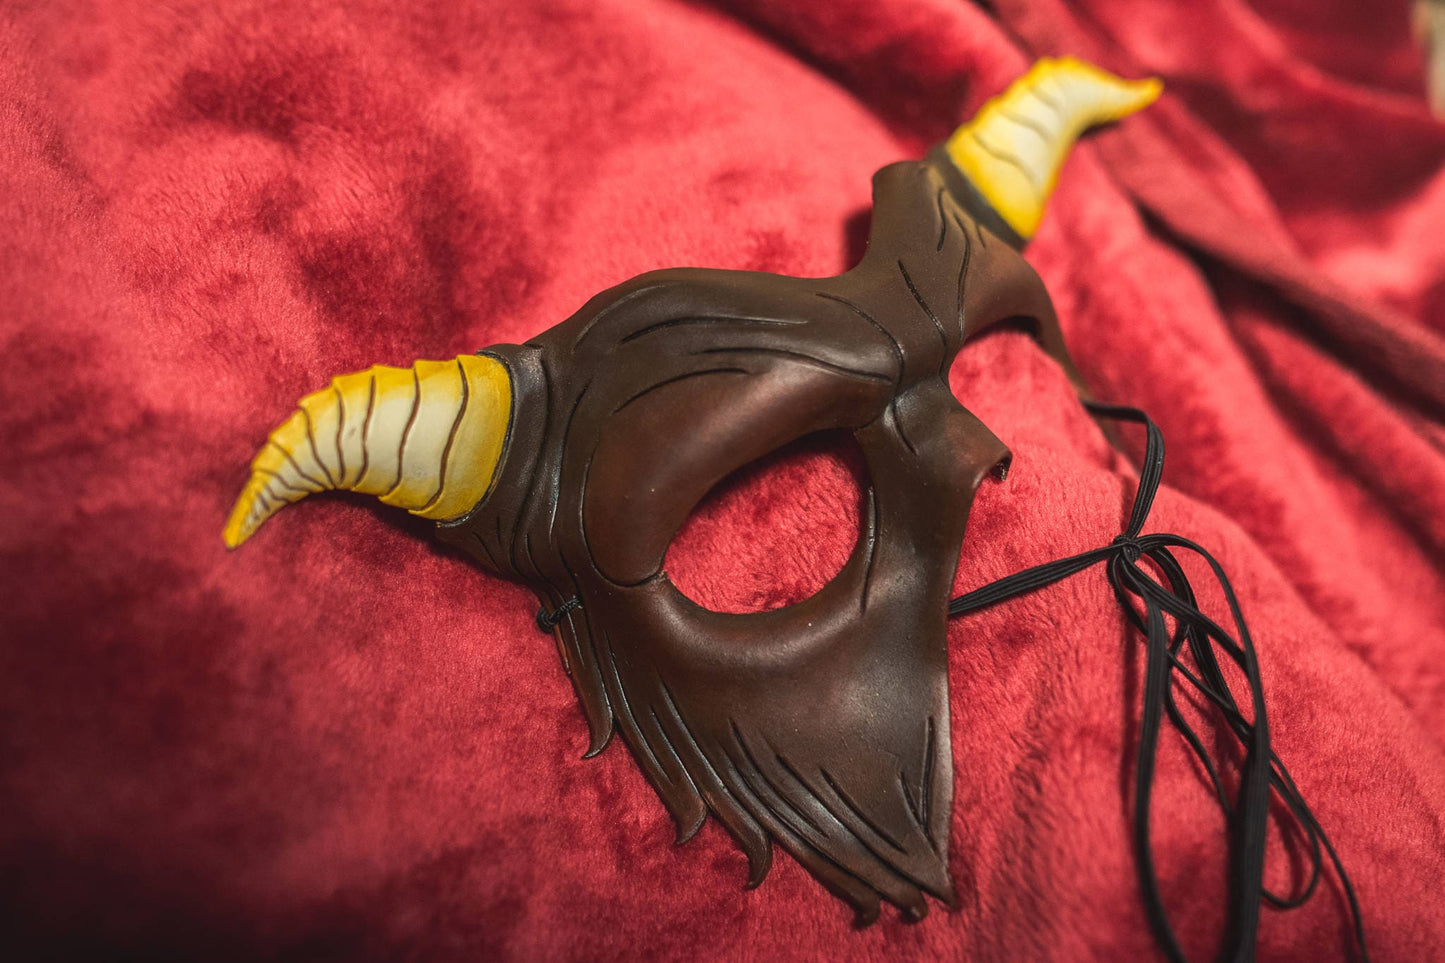 Beast of the Opera - Handmade Genuine Leather Mask with Horns in Natural Colors